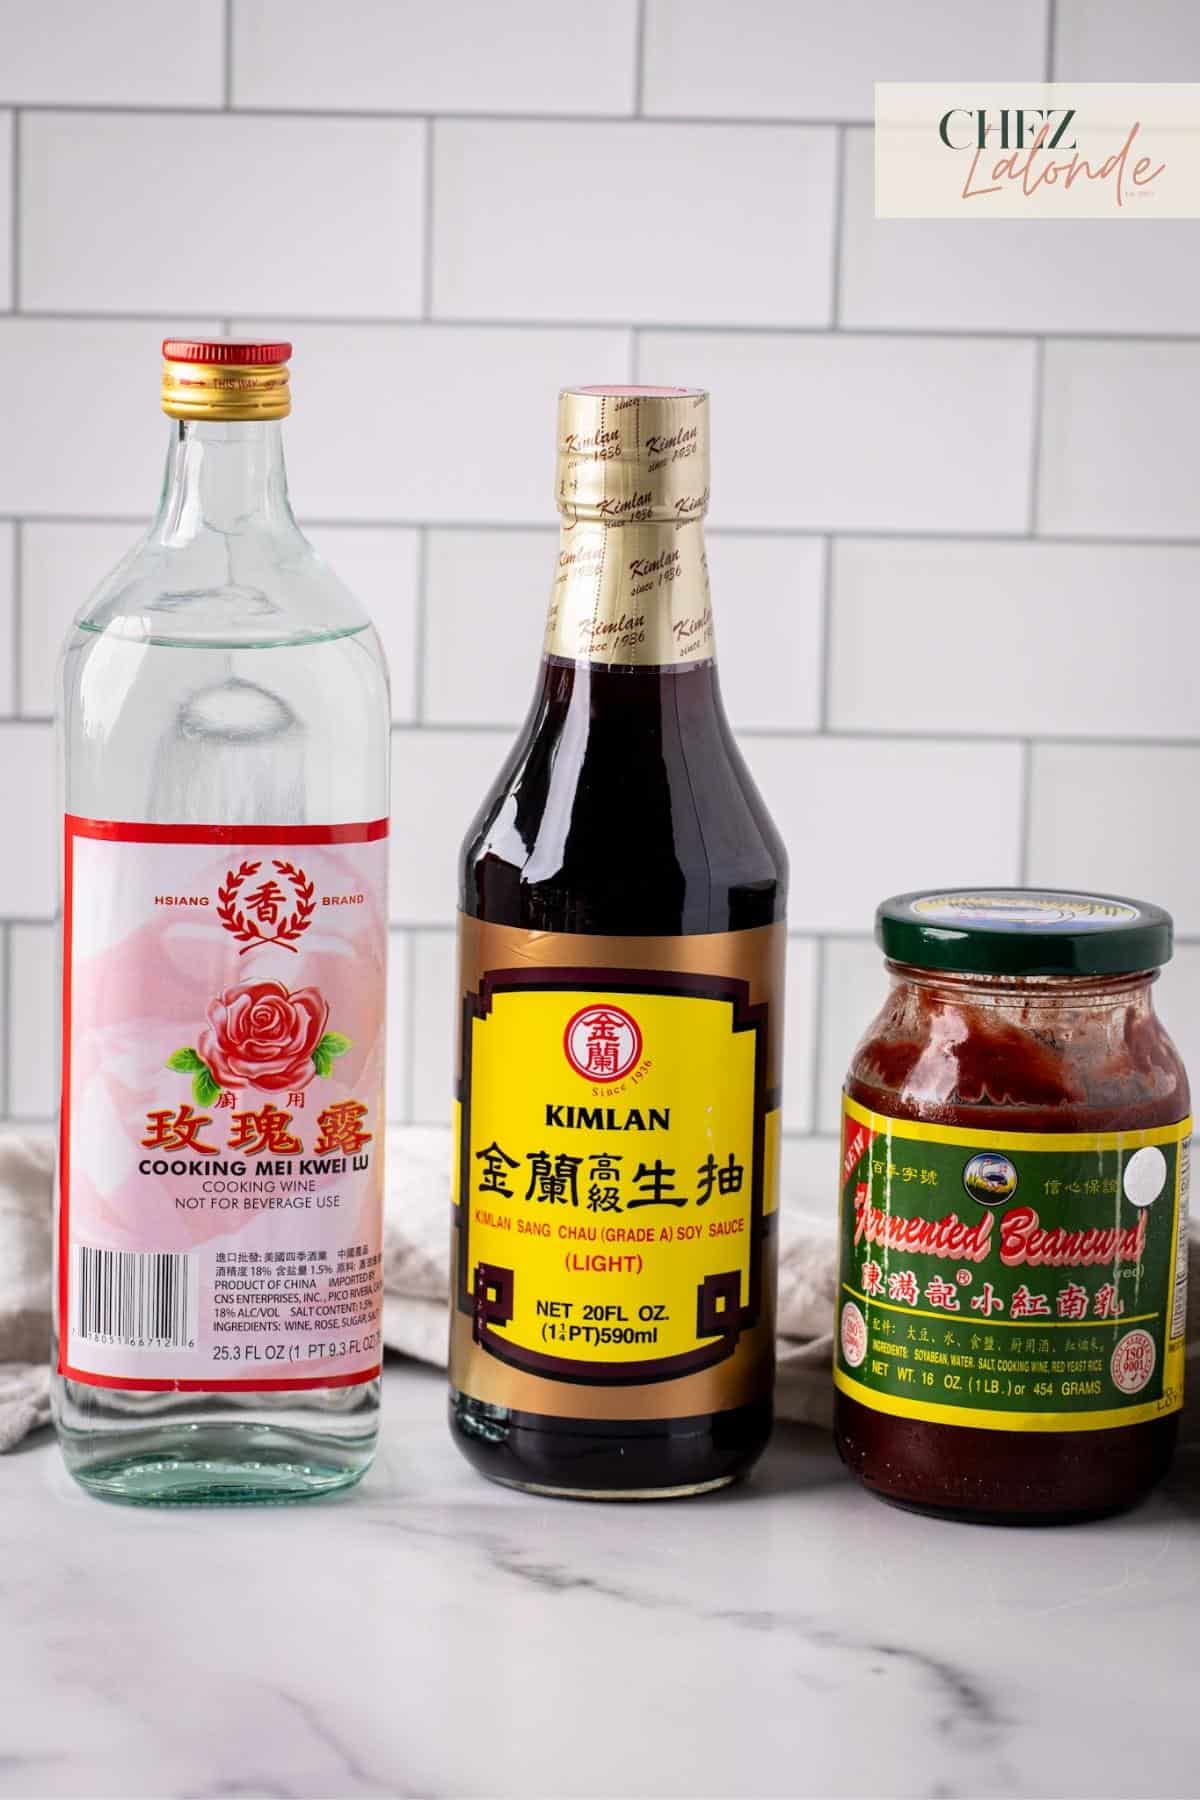 Photo to show my readers each Asian condiments that called for this recipe. From Left to right we have Chinese rose wine, soy sauce, and a jar of fermented red bean curd.